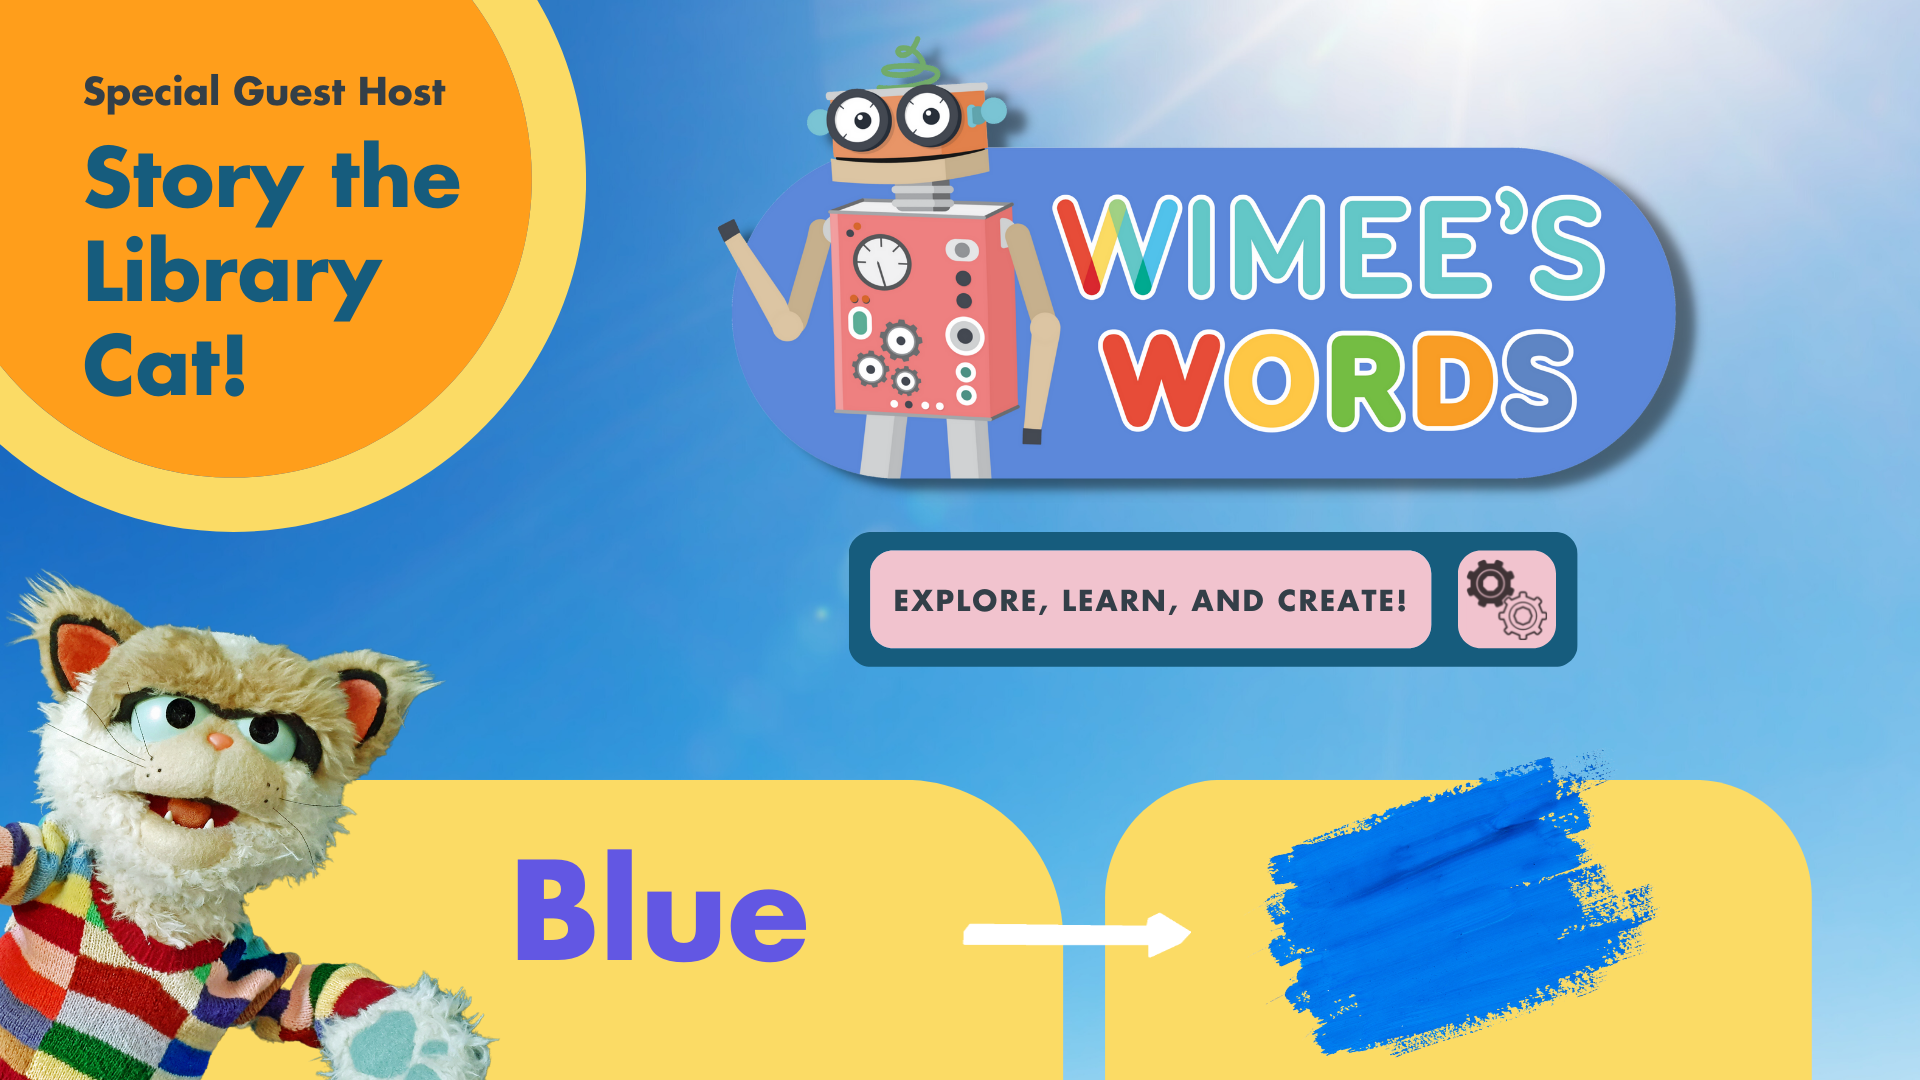 A photo of a clear blue sky with the Wimee's Words logo and text bubble "Special Guest Host Story the Library Cat." The title "Blue" and a photo of a beige and white cat puppet are on the image.